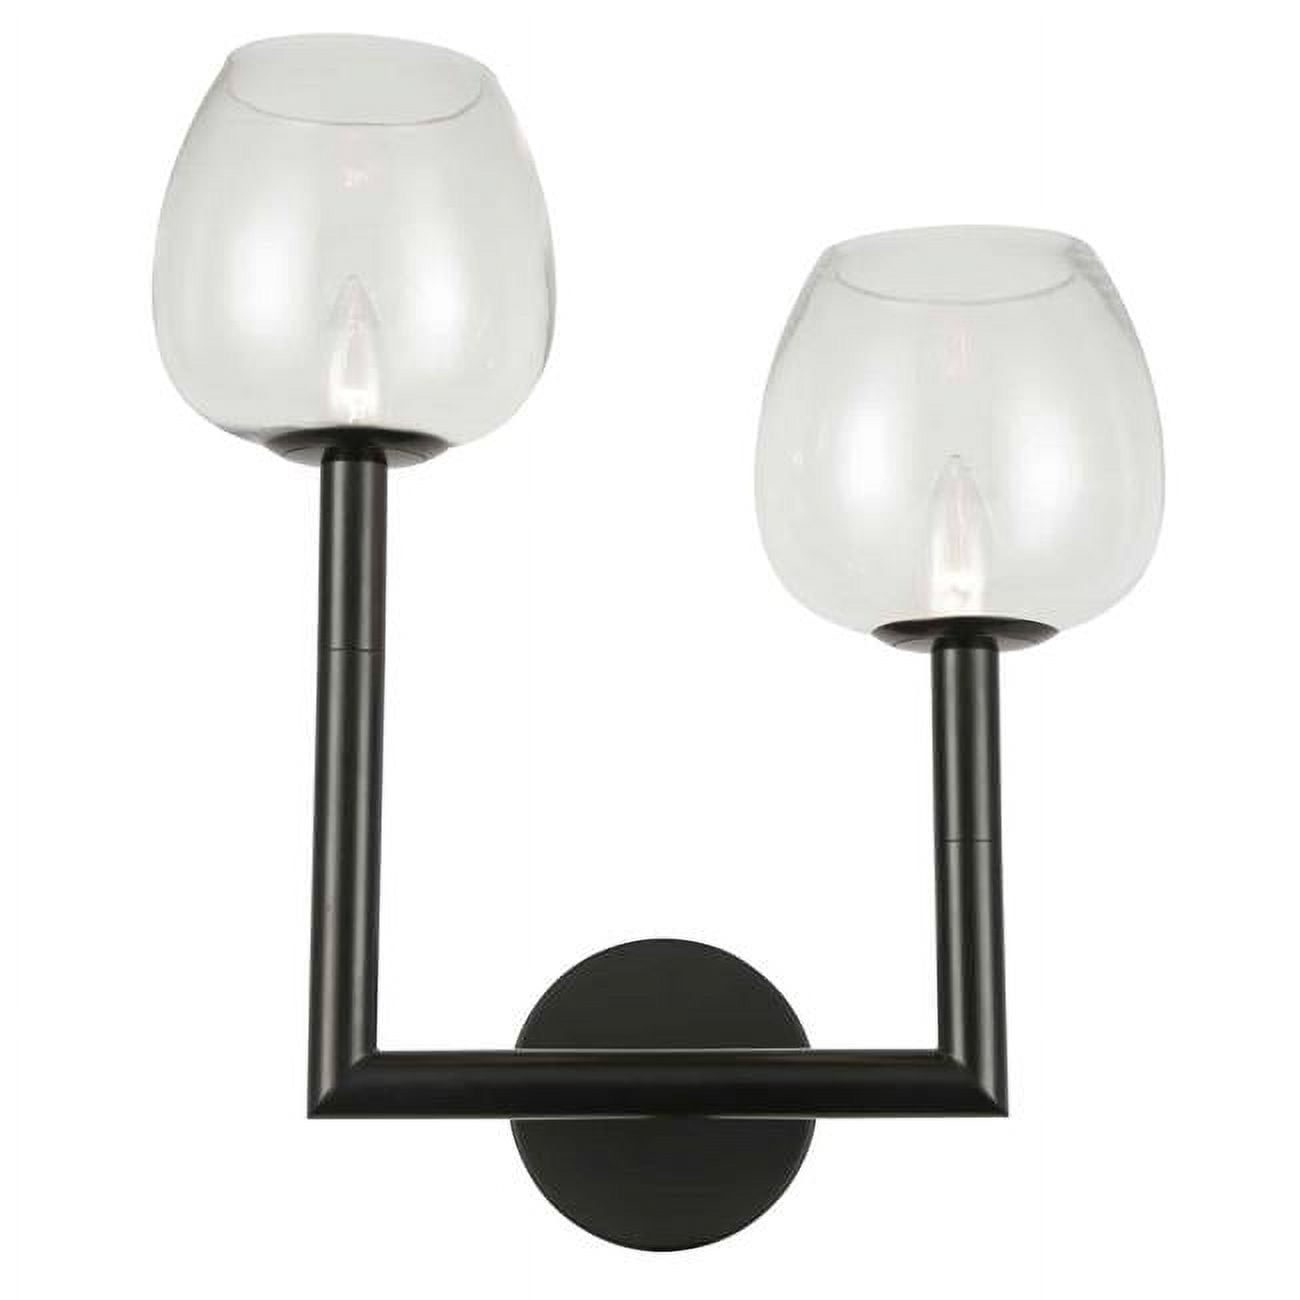 Picture of Dainolite NOR-L-112W-MB-CLR 2 Light Incandescent Wall Sconce, Matte Black with Clear Glass